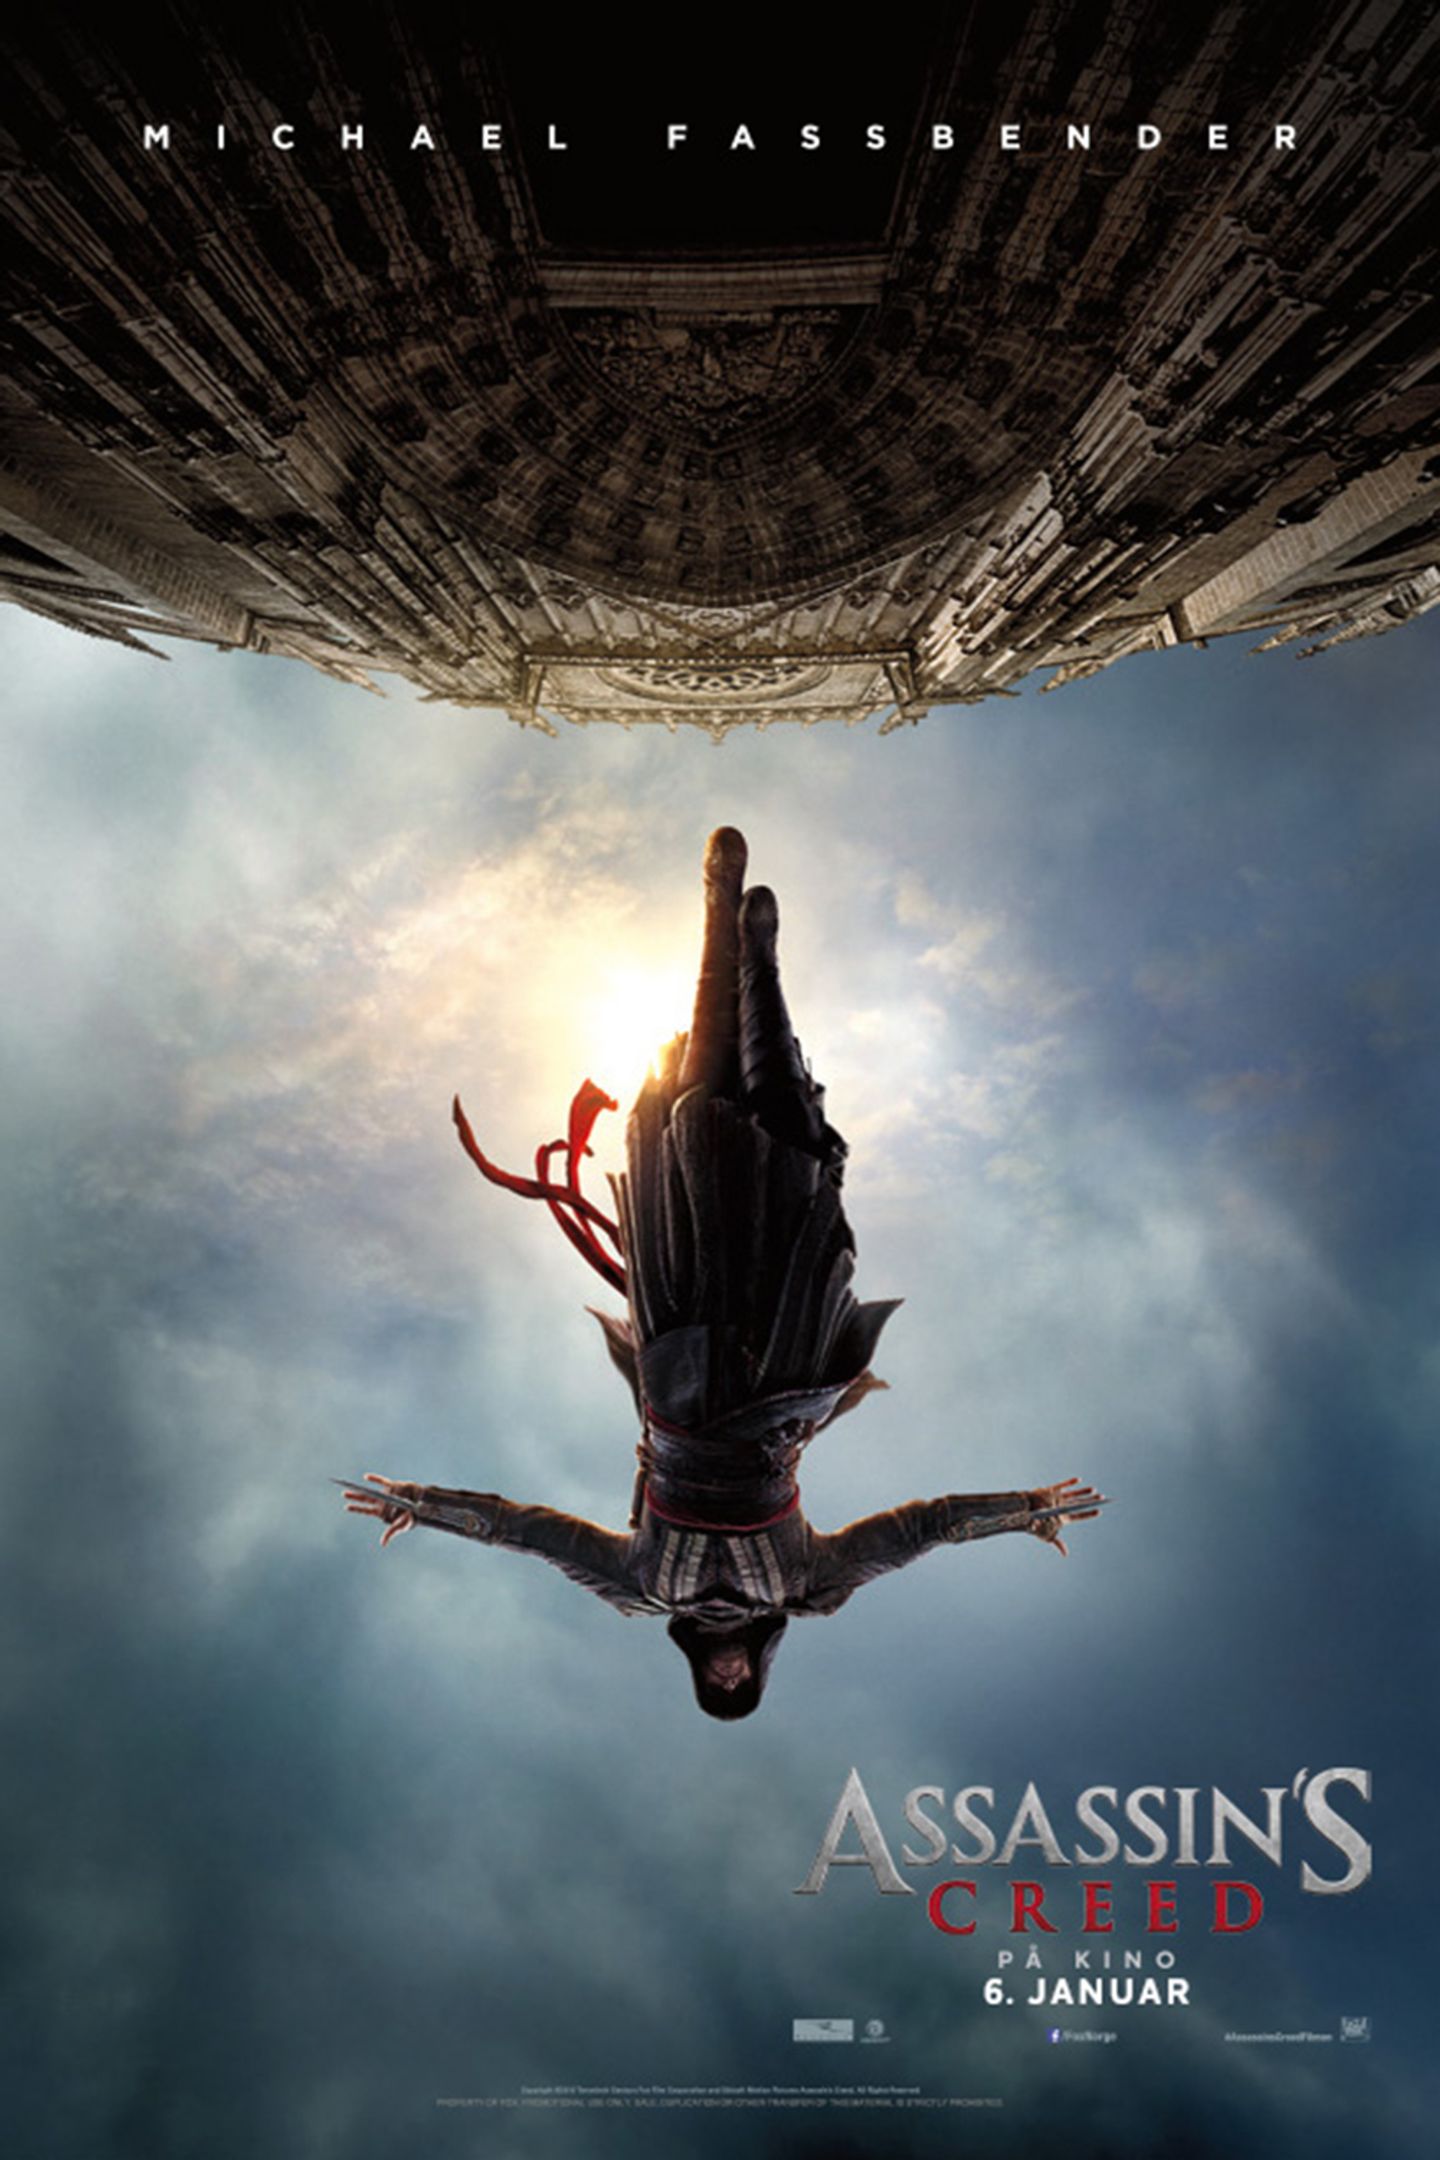 Plakat for 'Assassin's Creed (3D)'